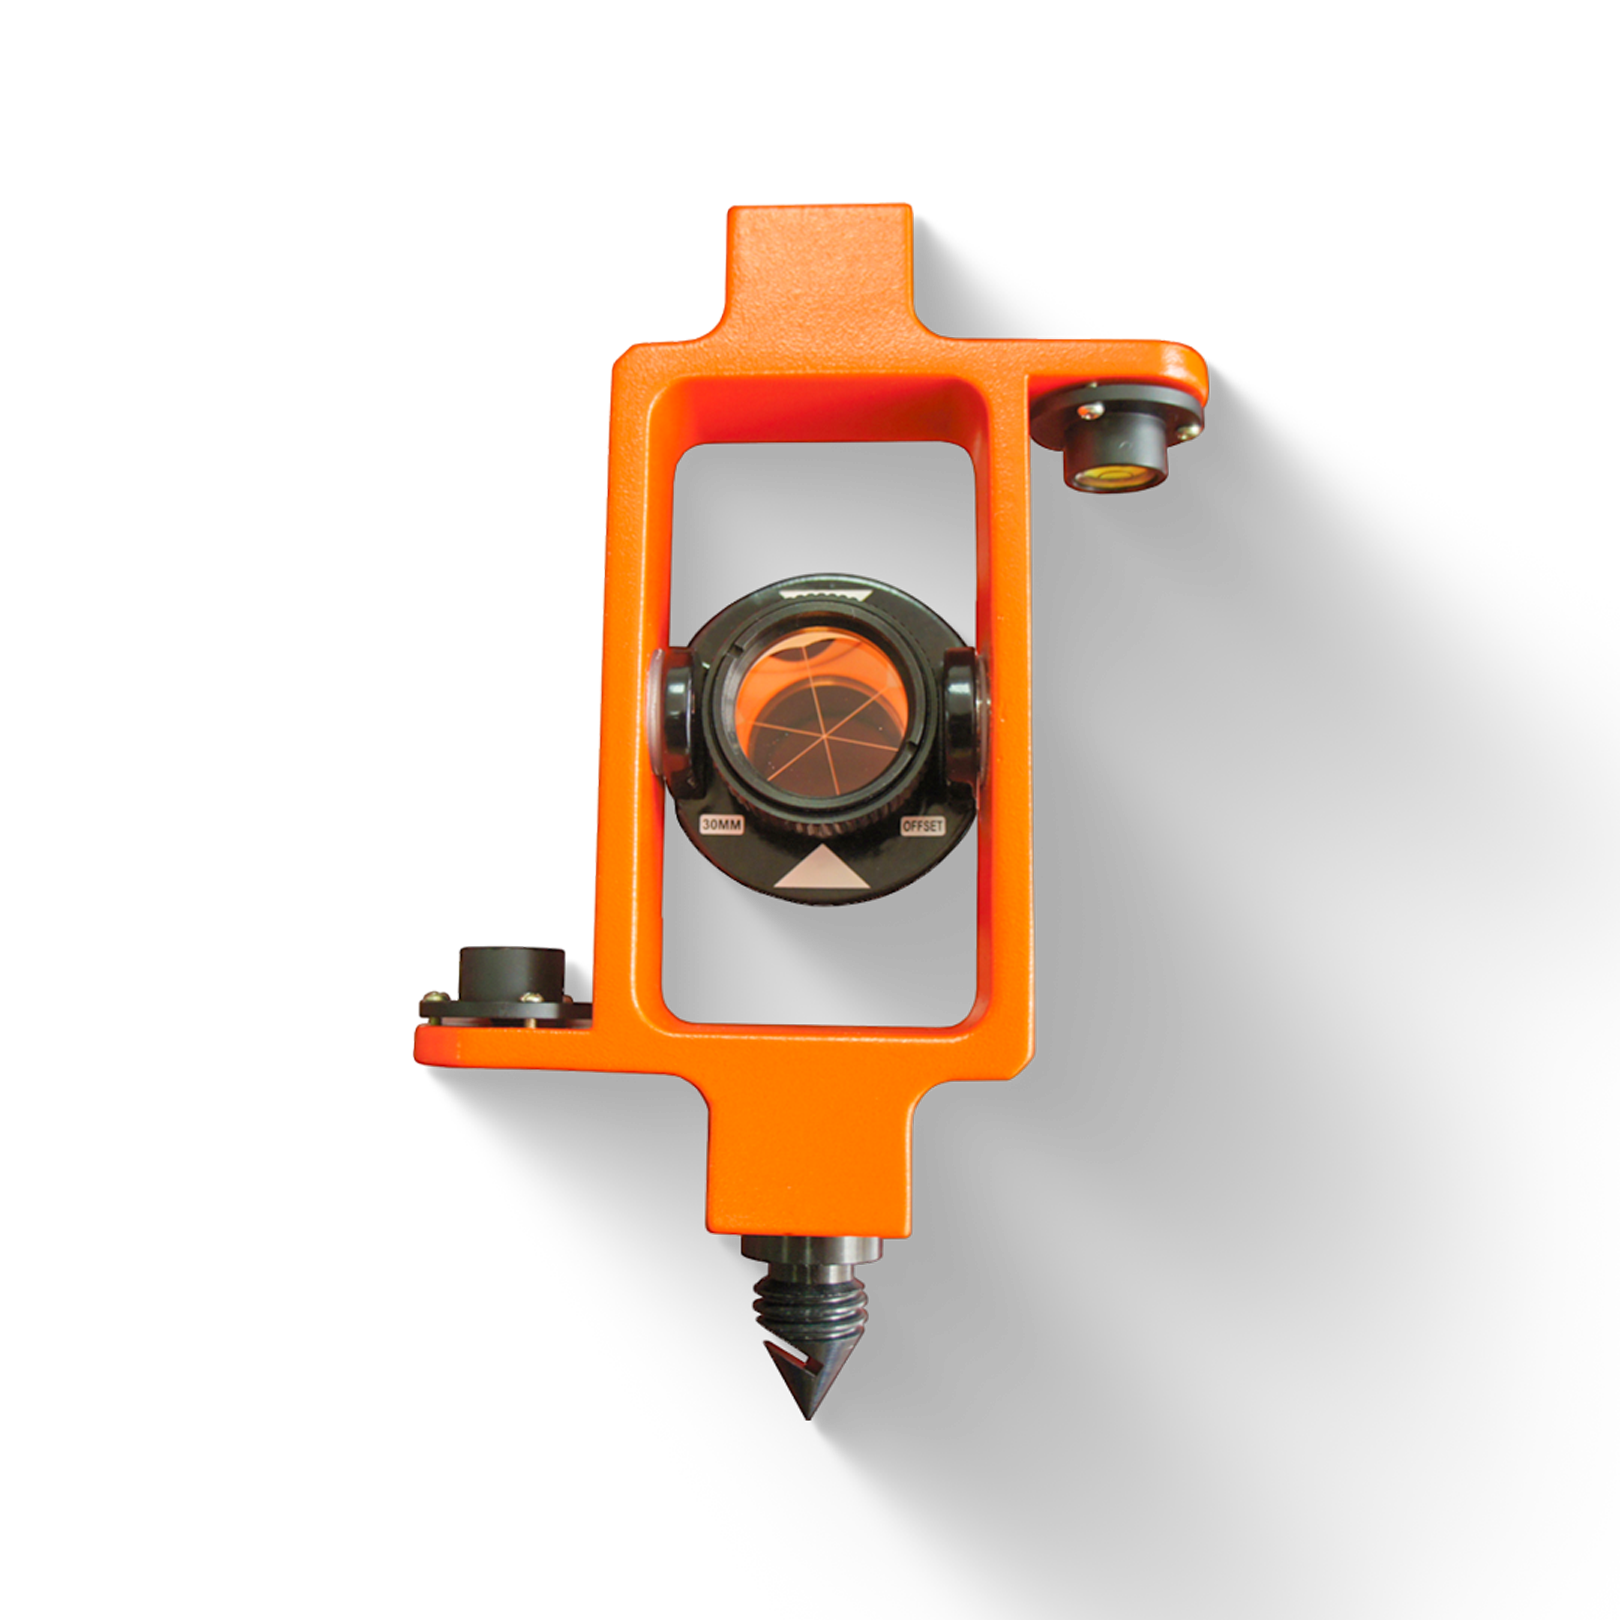 Stakeout Prism System, Orange